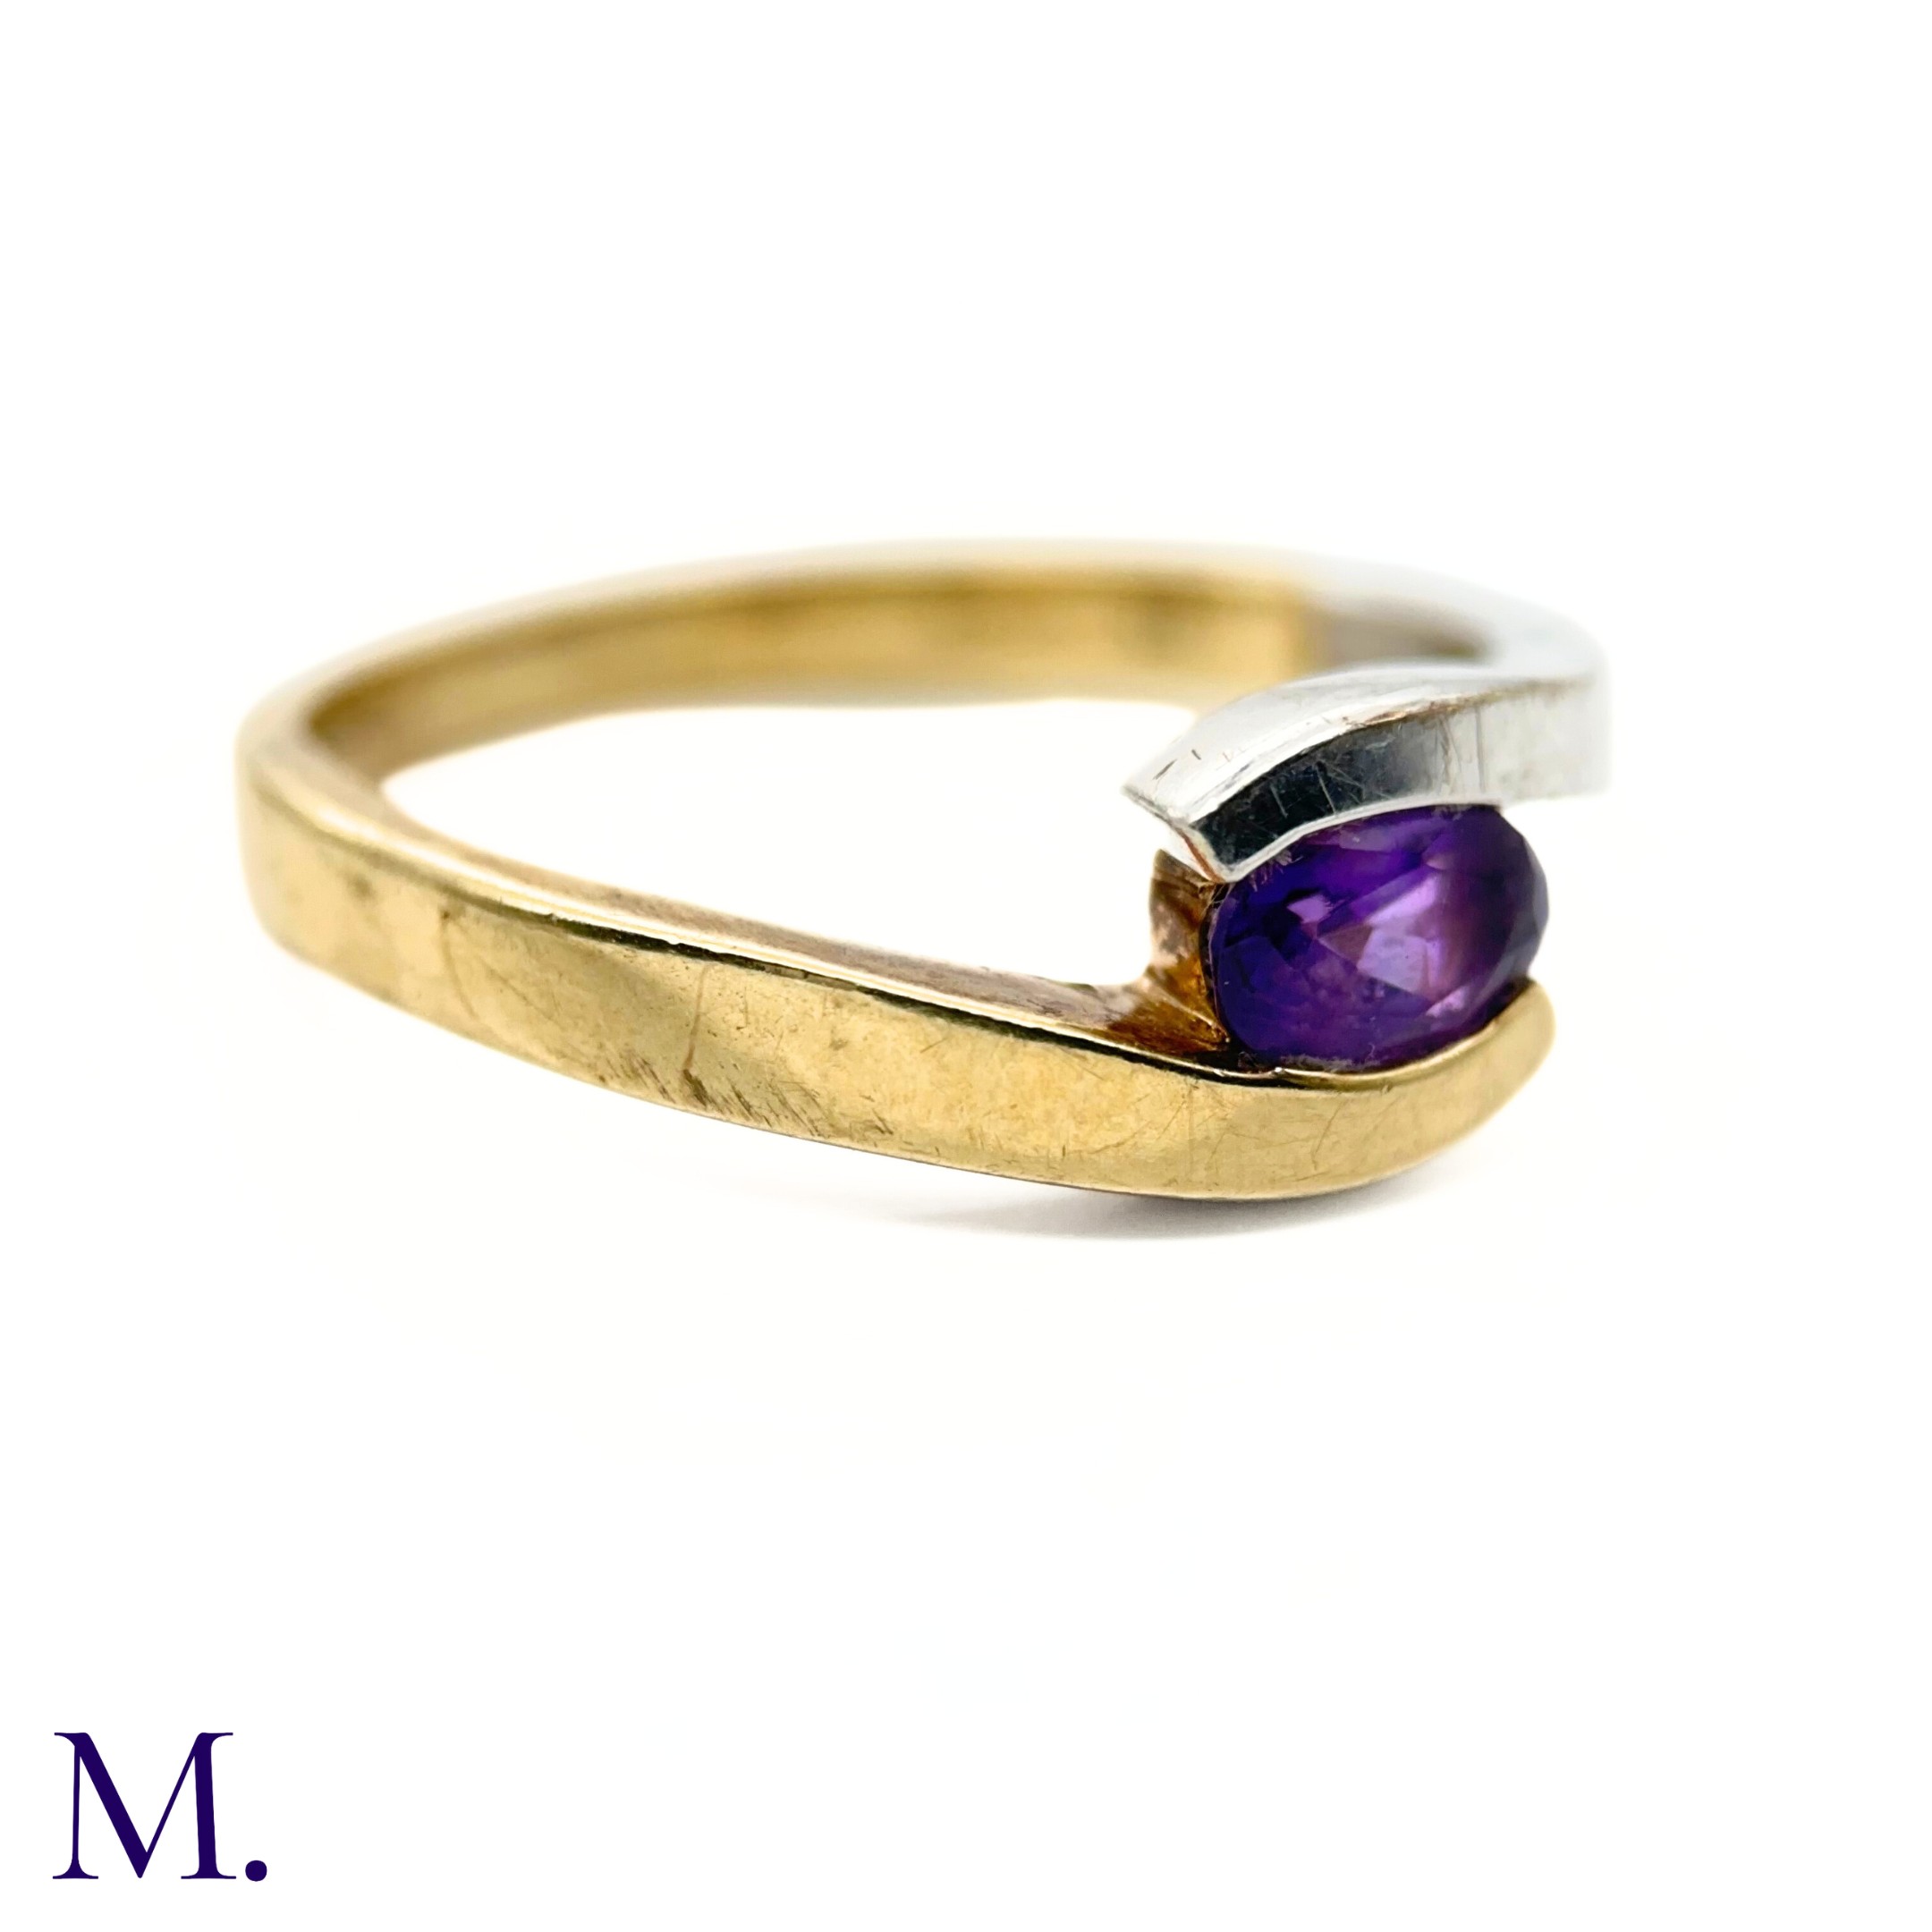 NO RESERVE - A Bi-Colour Gold and Amethyst Ring - Image 3 of 7